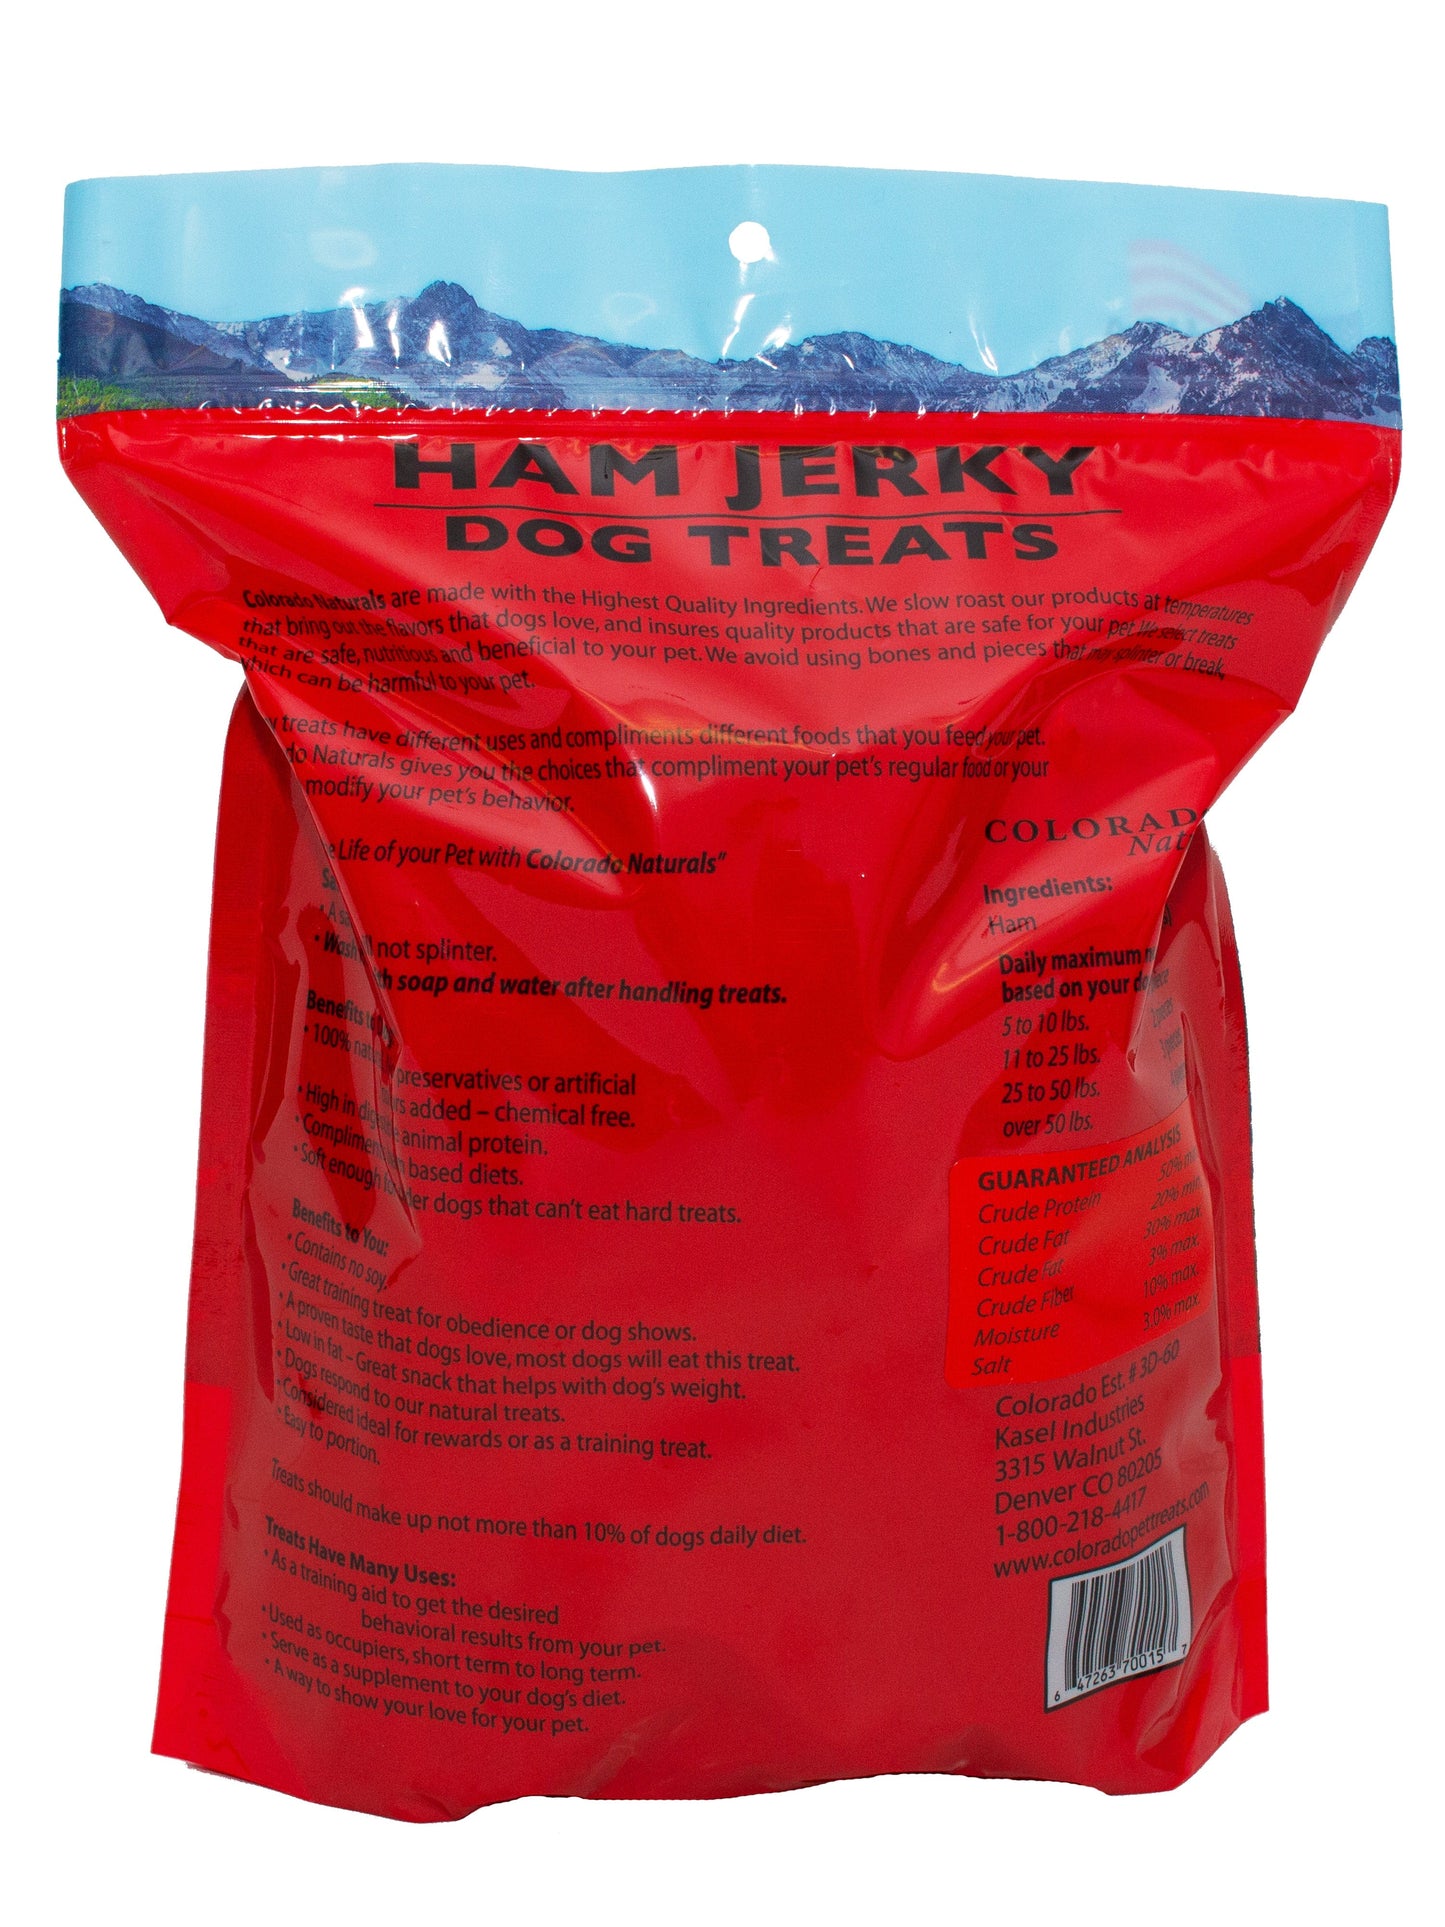 A photo of the back of the best 16 oz Ham Jerky Dog Treats from Colorado Pet Treats by Colorado Naturals. Colorado Pet Treats - All-Natural, All-American Dog Jerky, Jerky Chips, and Bones - Treat your furry friend to our delicious and healthy pet treats made with only the finest ingredients sourced in the USA. Delicious and chewy all-American dog jerky made with natural ingredients sourced in Colorado.